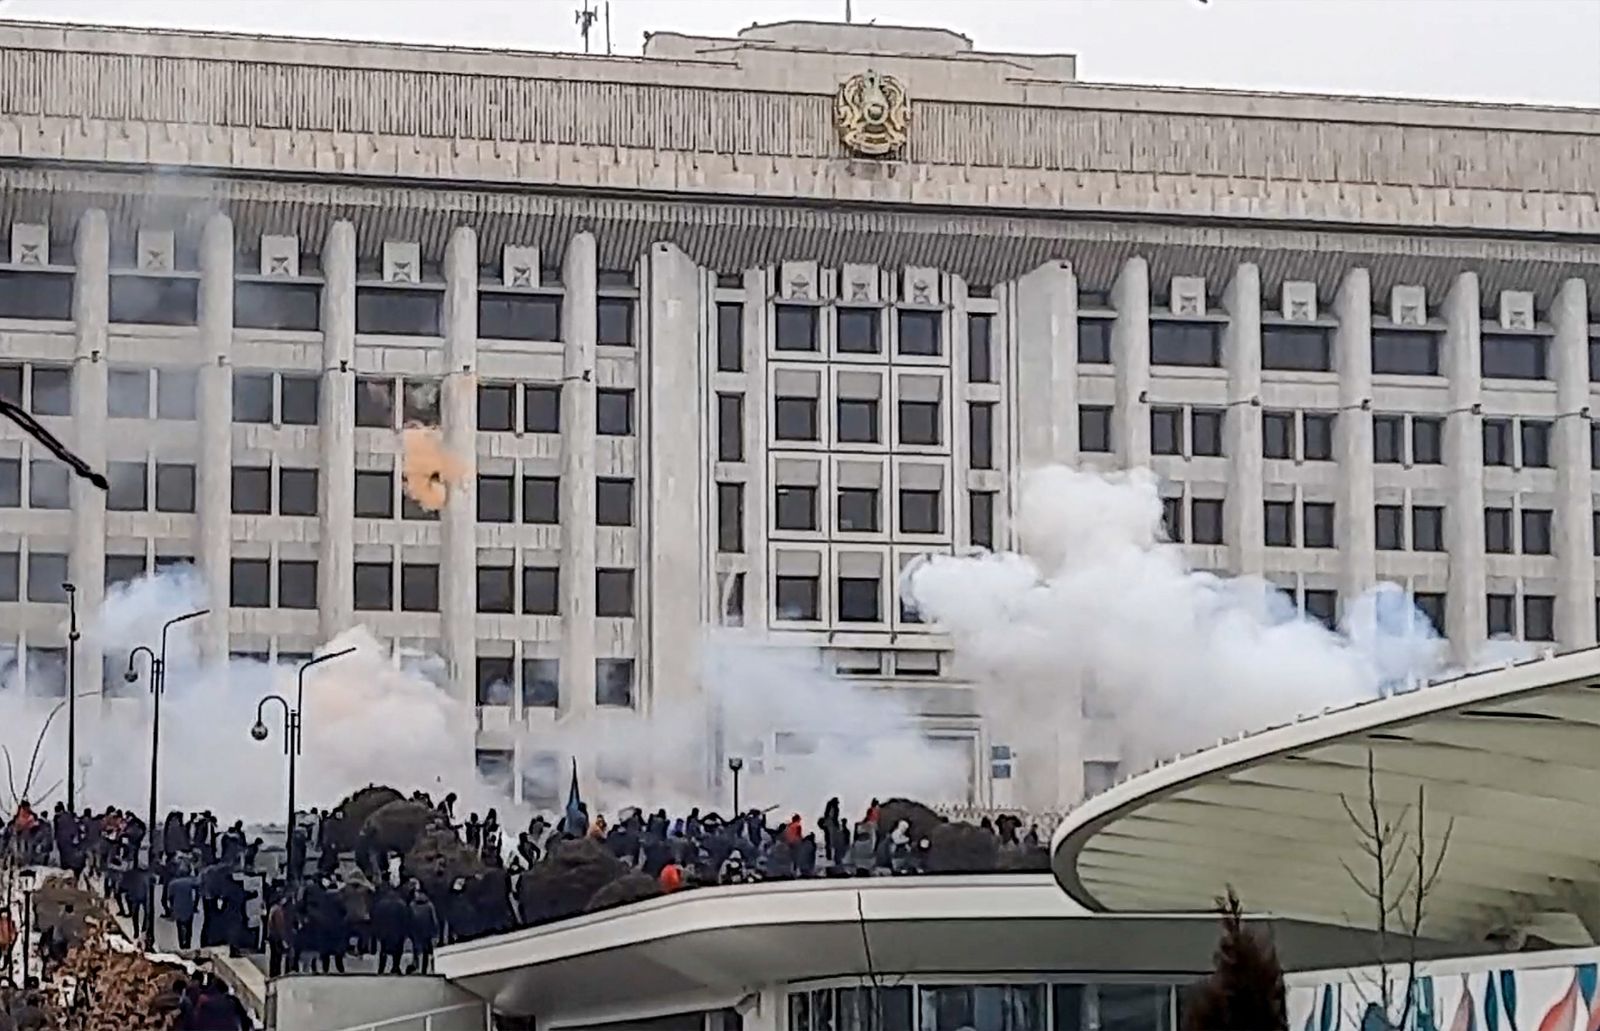 This image grab shows protesters near an administrative building during a rally over a hike in energy prices in Almaty on January 5, 2022. - Protesters stormed the mayor's office in Kazakhstan's largest city Almaty on January 5, 2022 as unprecedented unrest in the Central Asian nation spun out of control. (Photo by AFP) - AFP